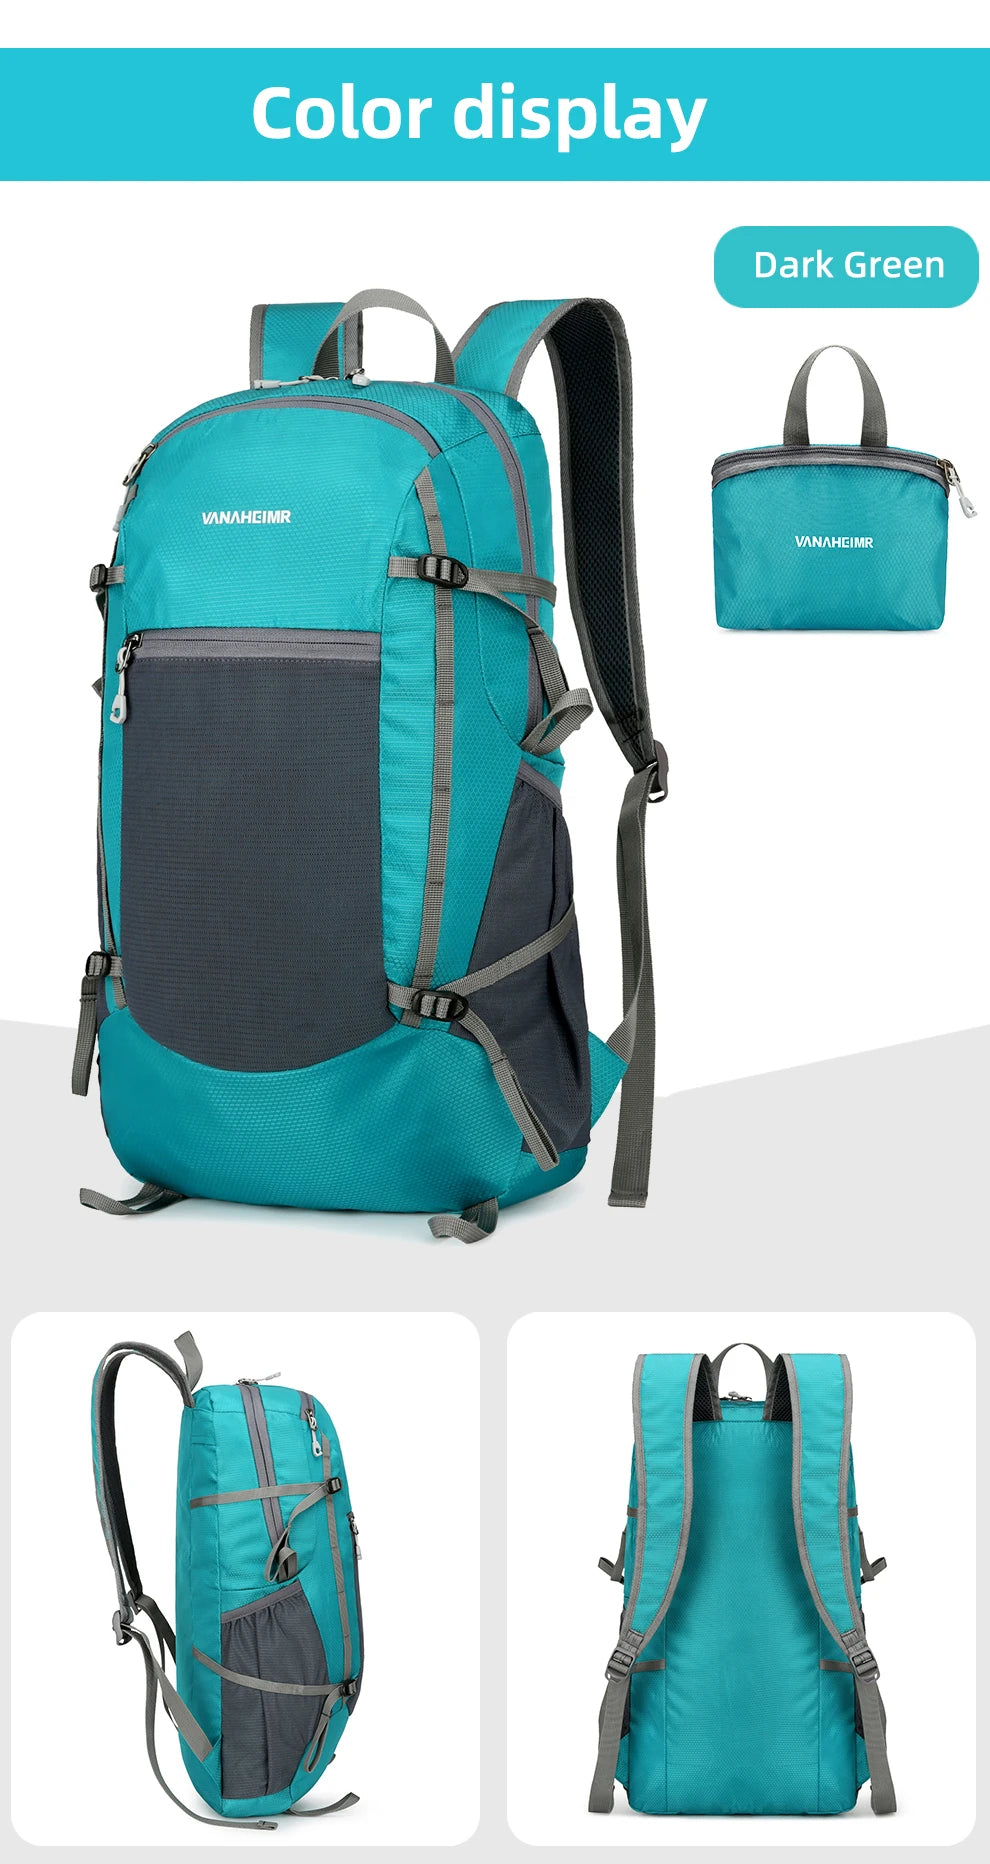 Portable Travel Backpack (18L) | Cycling, Mountaineering, Hiking.